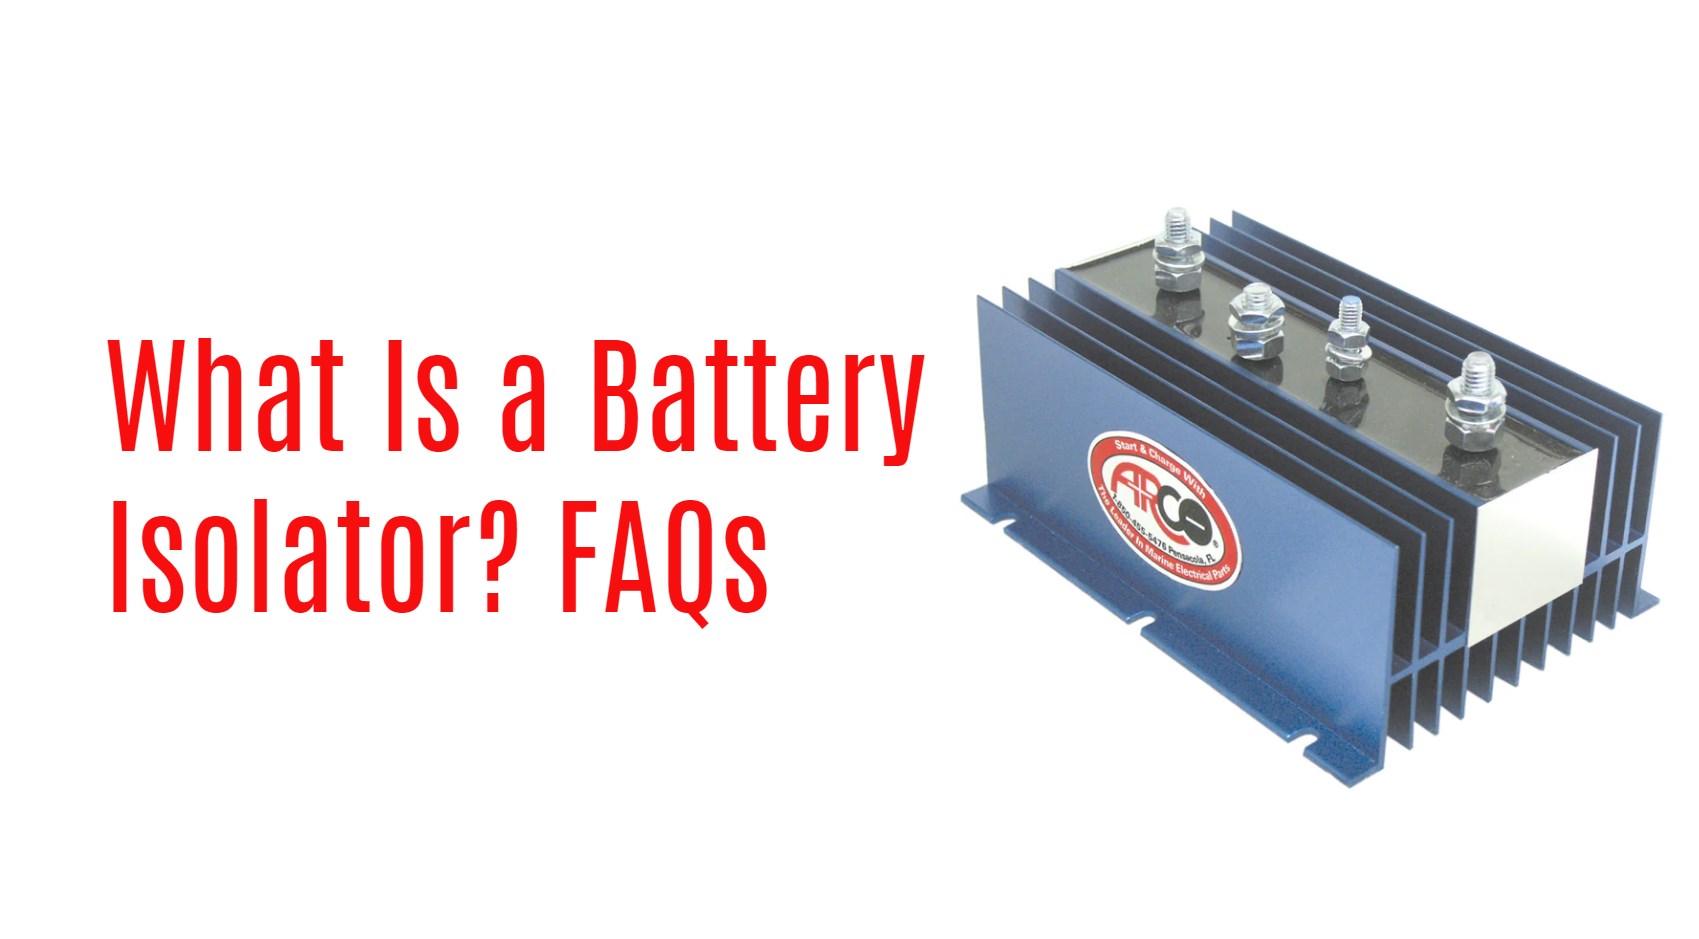 What Is a Battery Isolator? Battery Isolator FAQs